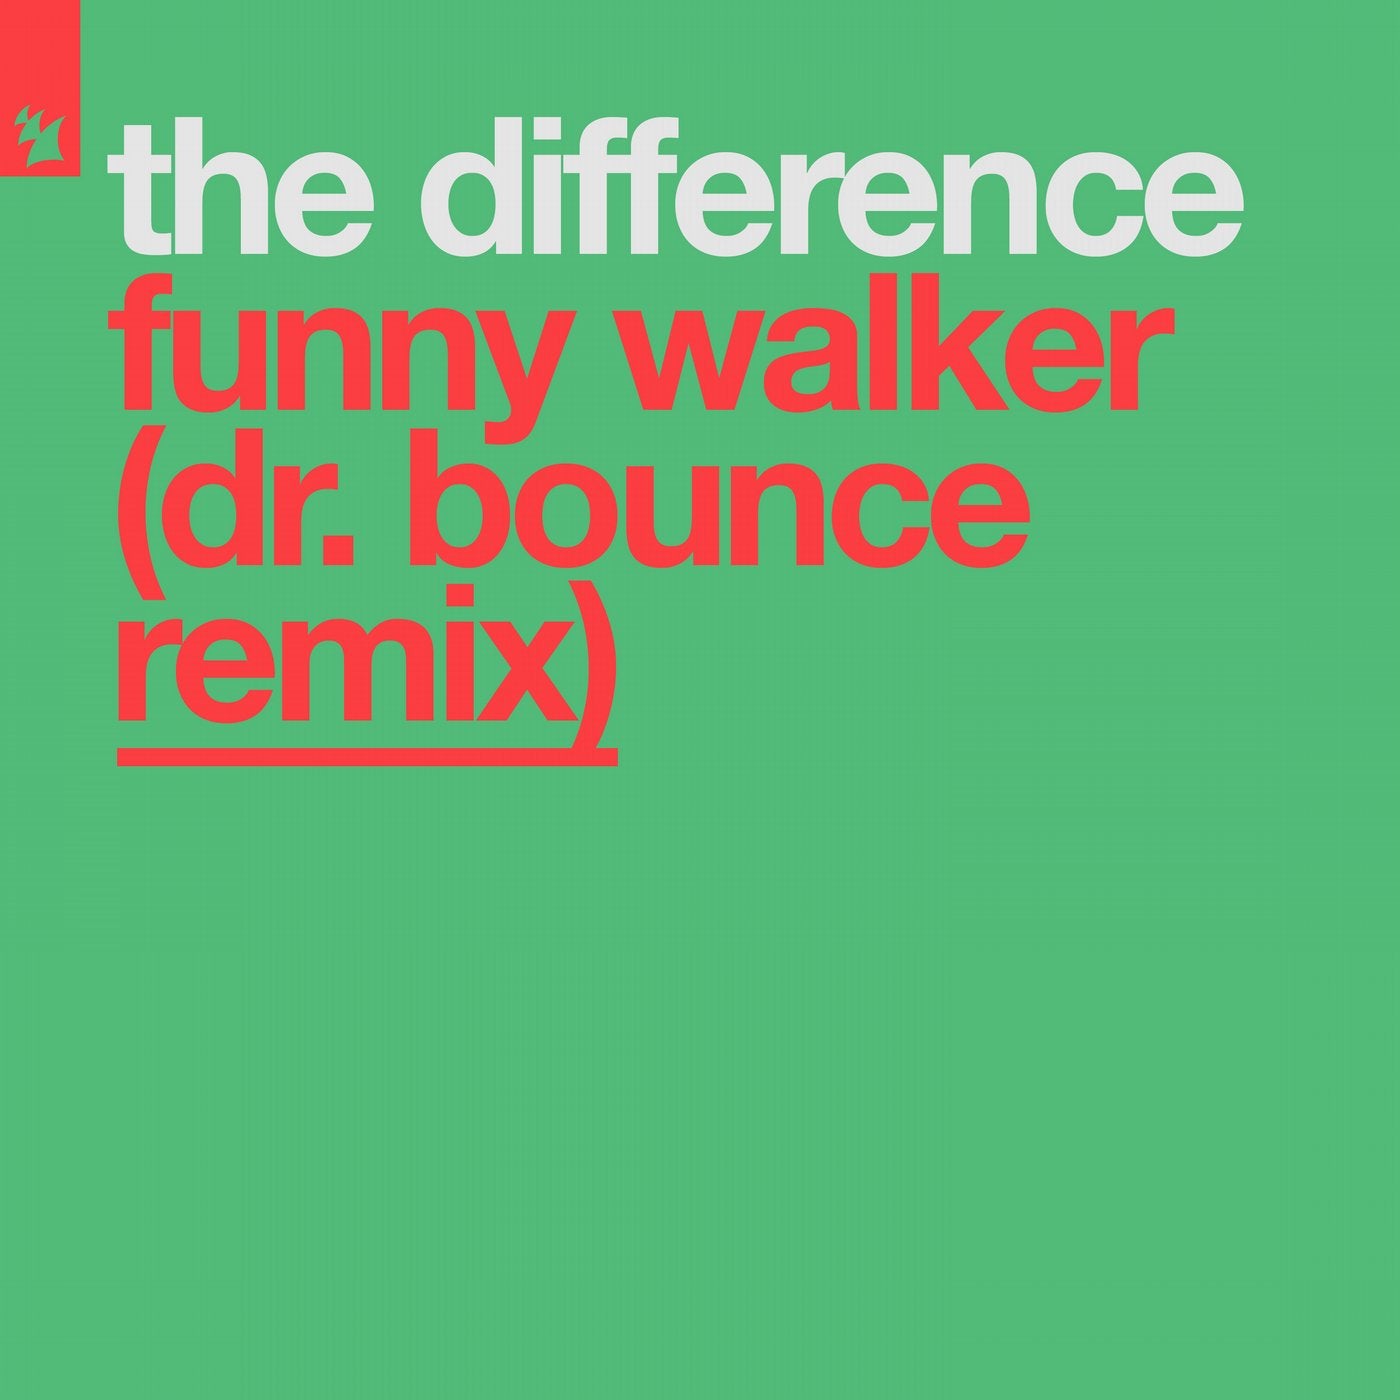 Funny Walker - Dr. Bounce Remix